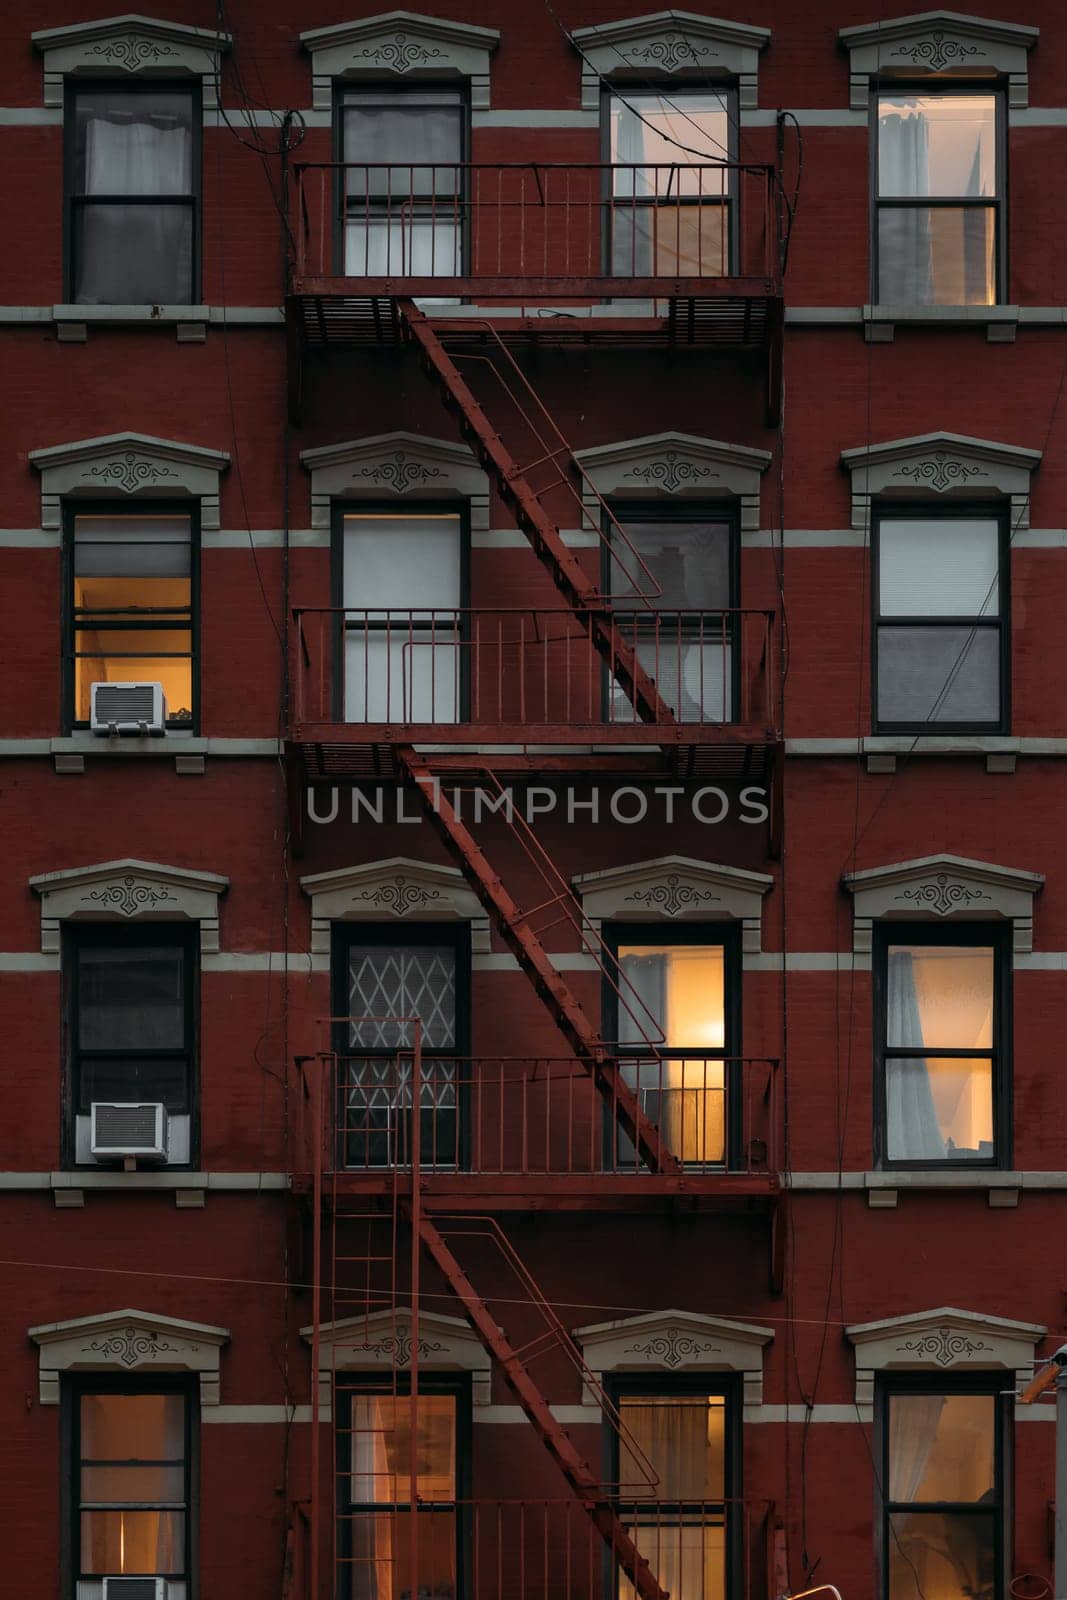 Charming New York Architecture with Fire Escapes and Lit Windows by apavlin